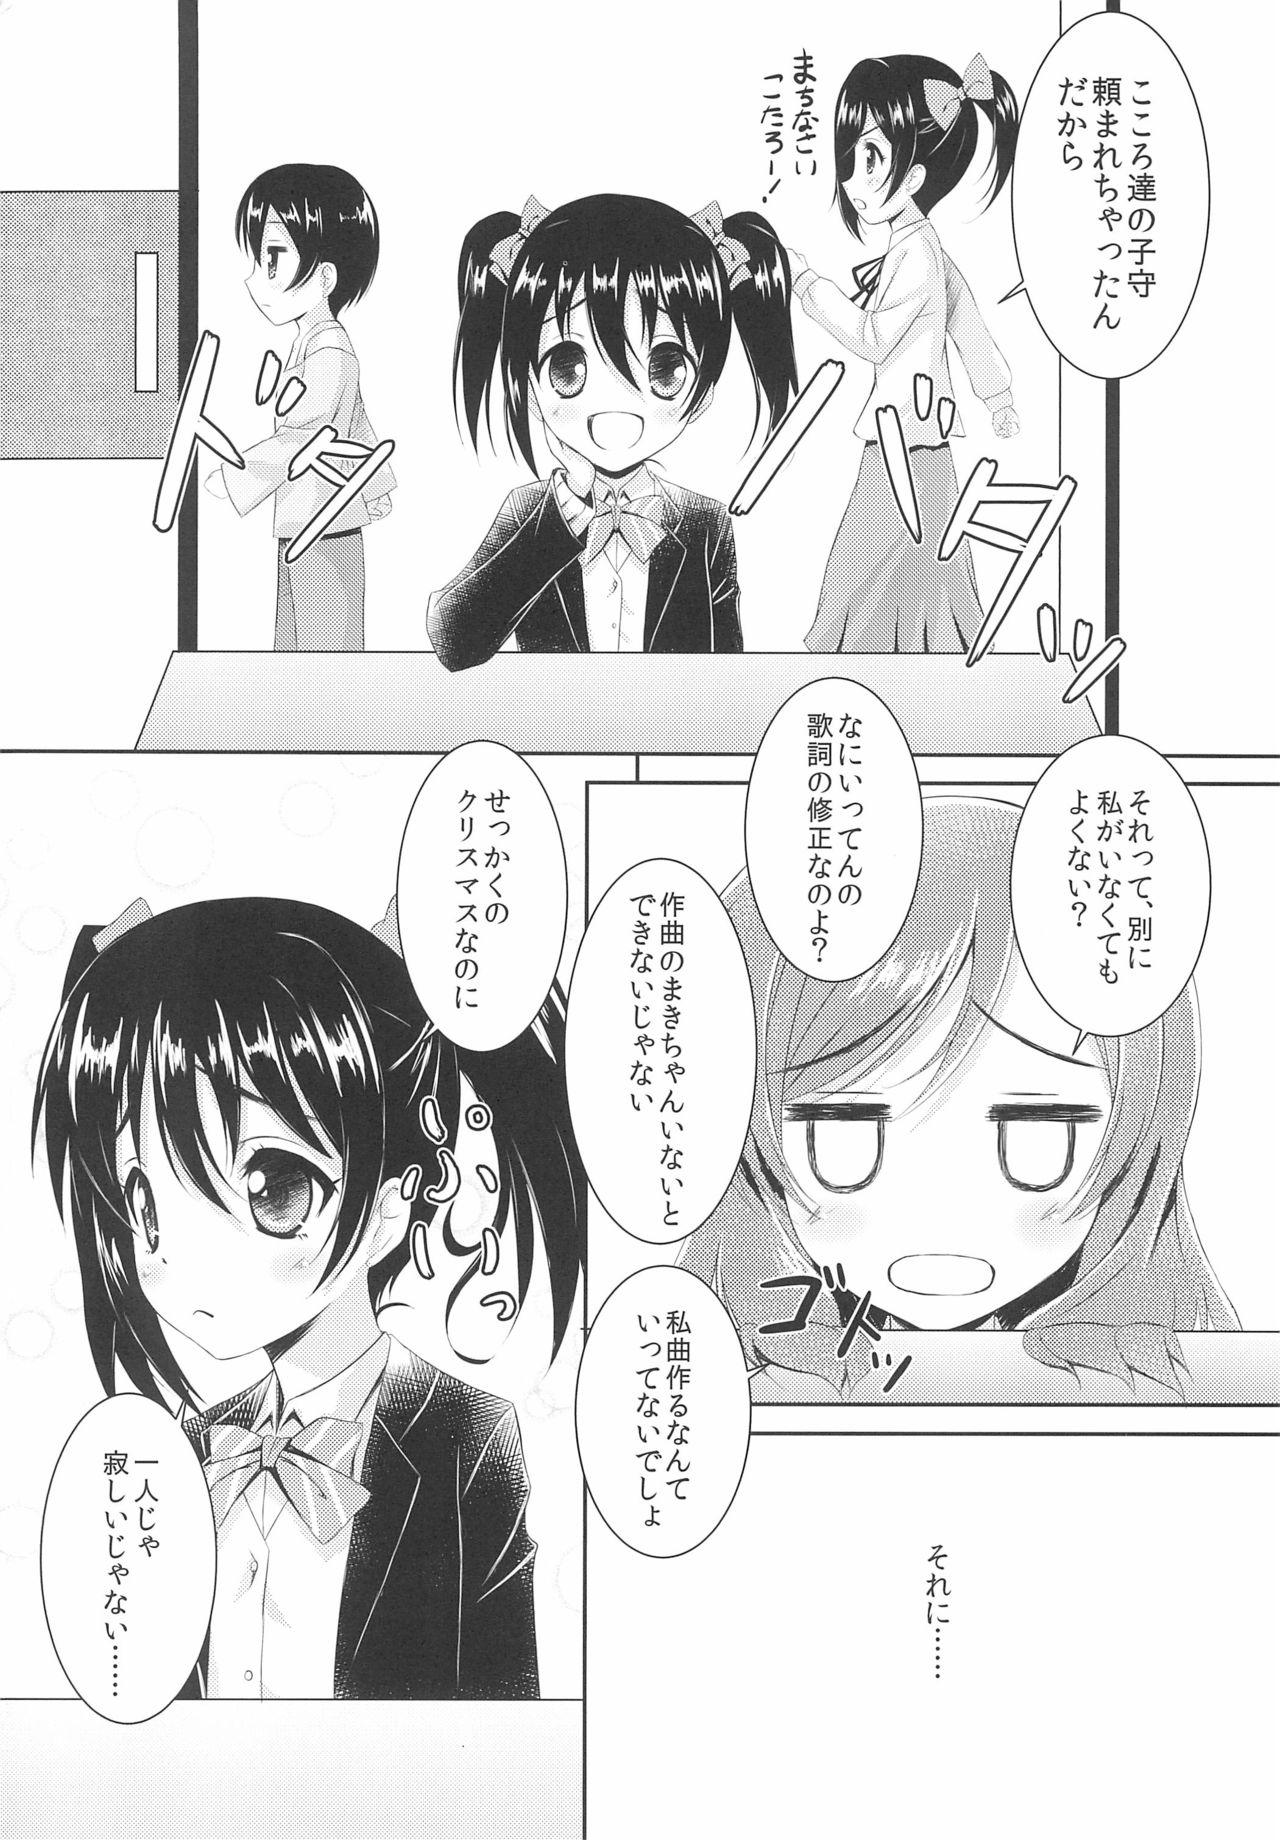 Old And Young NicoMaki MIKAN Winter - Love live Camera - Page 4